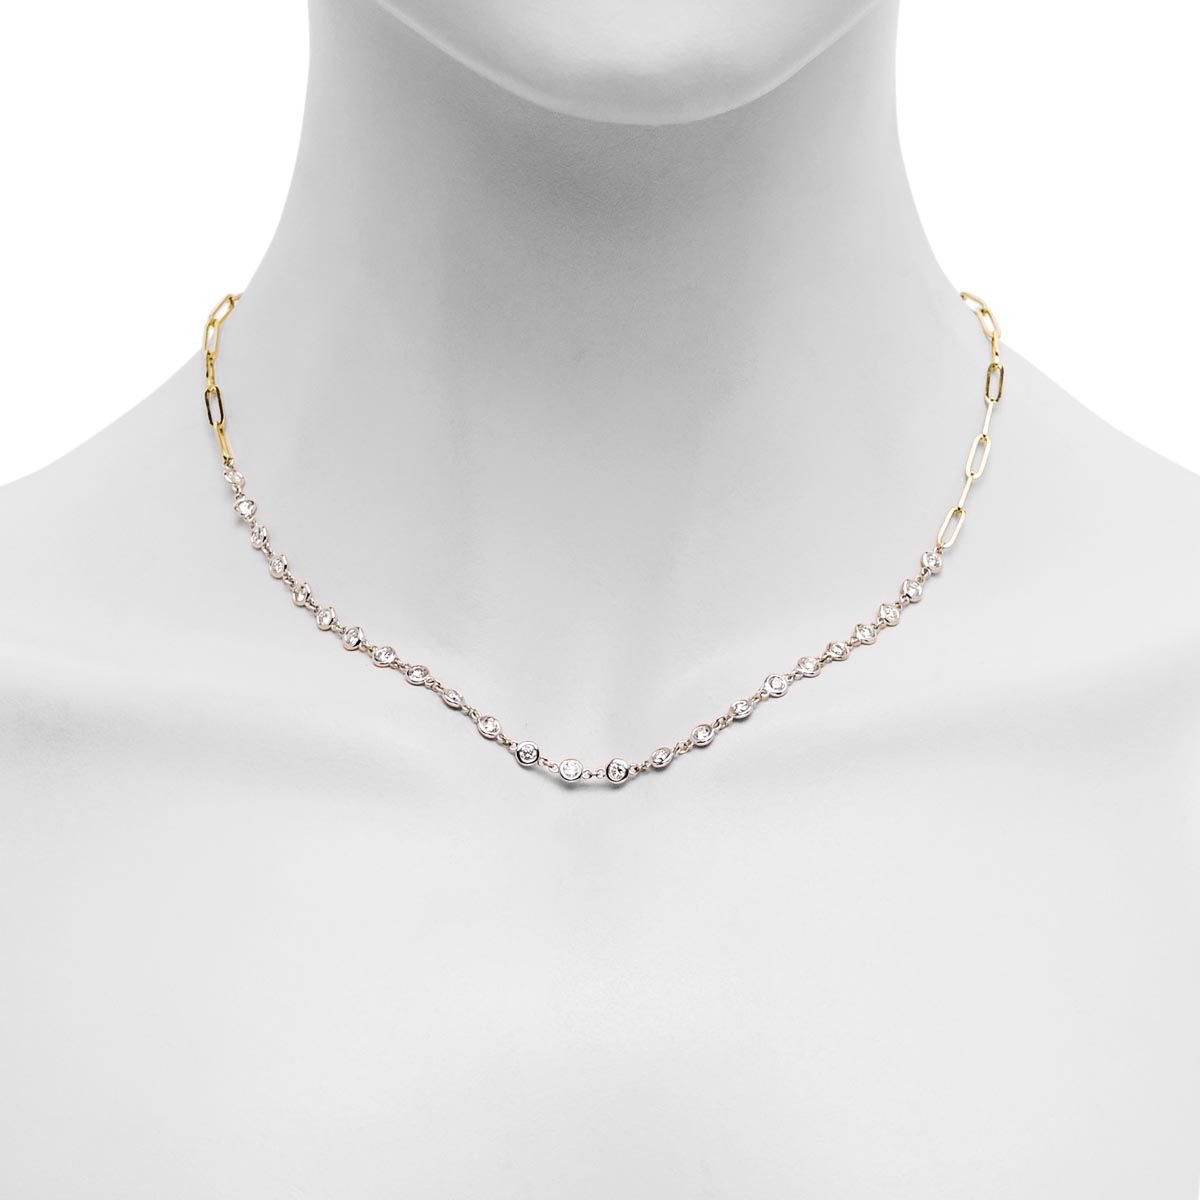 Diamond Bezel Paperclip Chain Necklace in 14kt White and Yellow Gold (1 3/4ct tw)